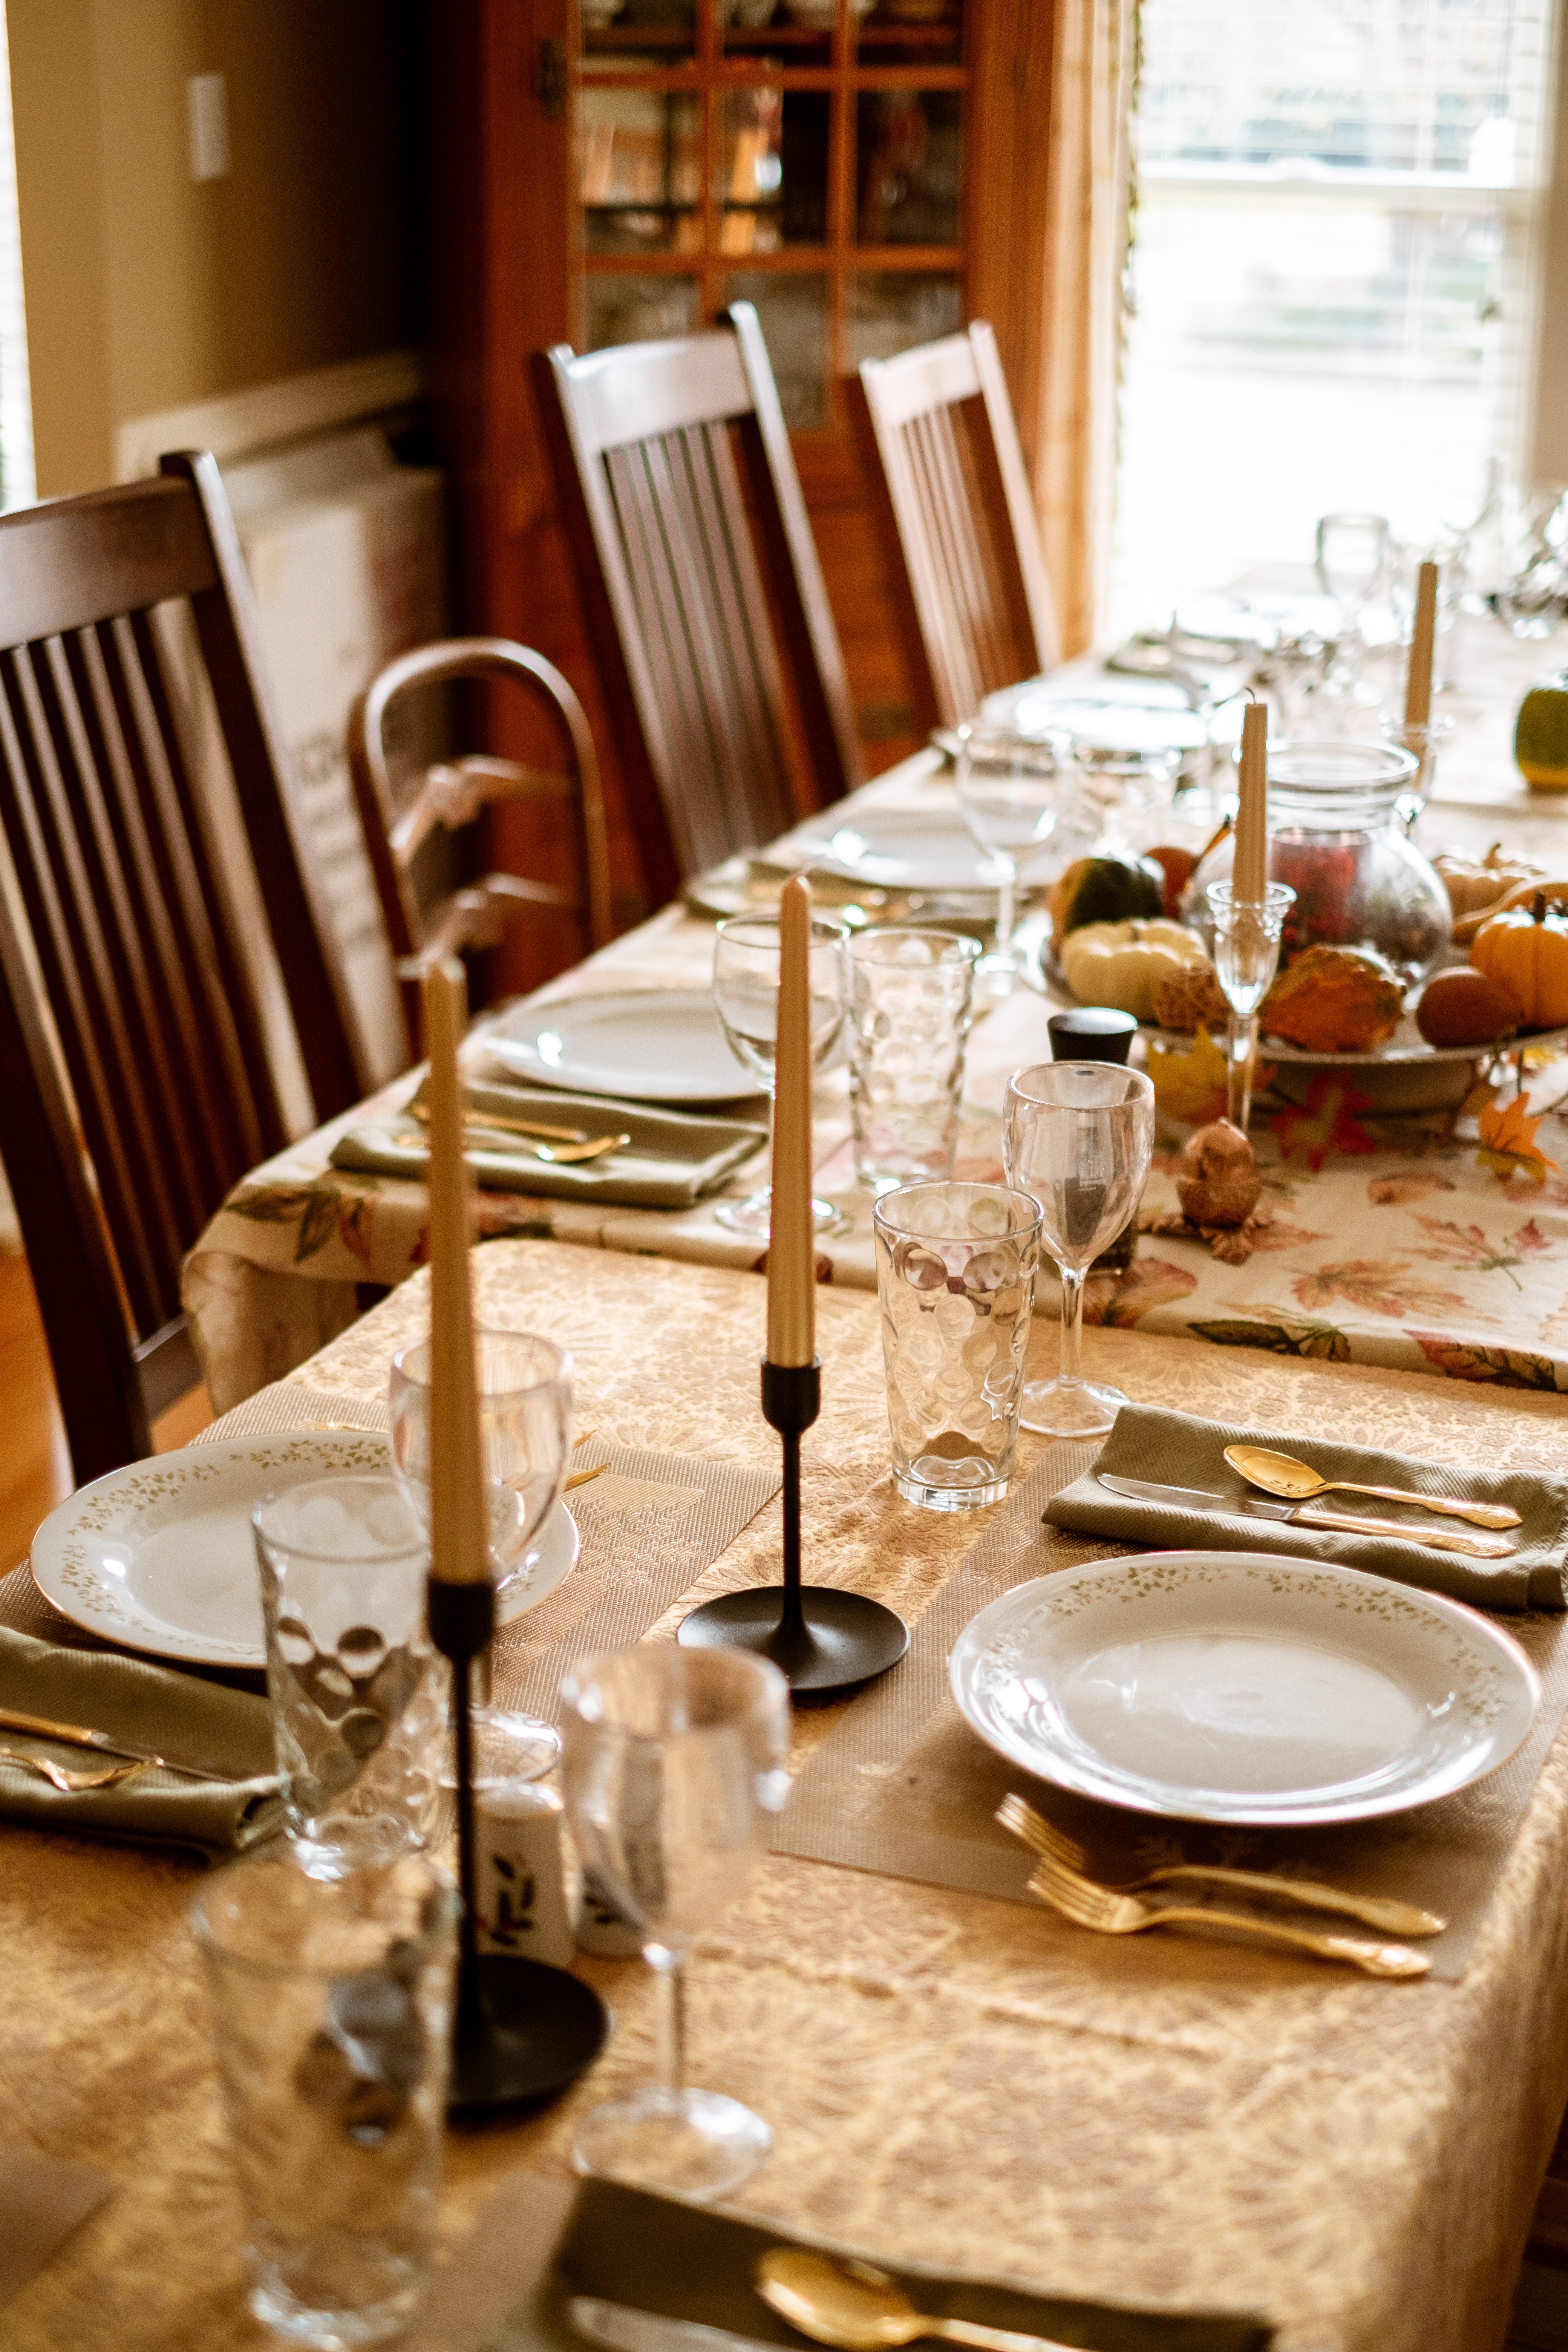 A table set formally for Thanksgiving